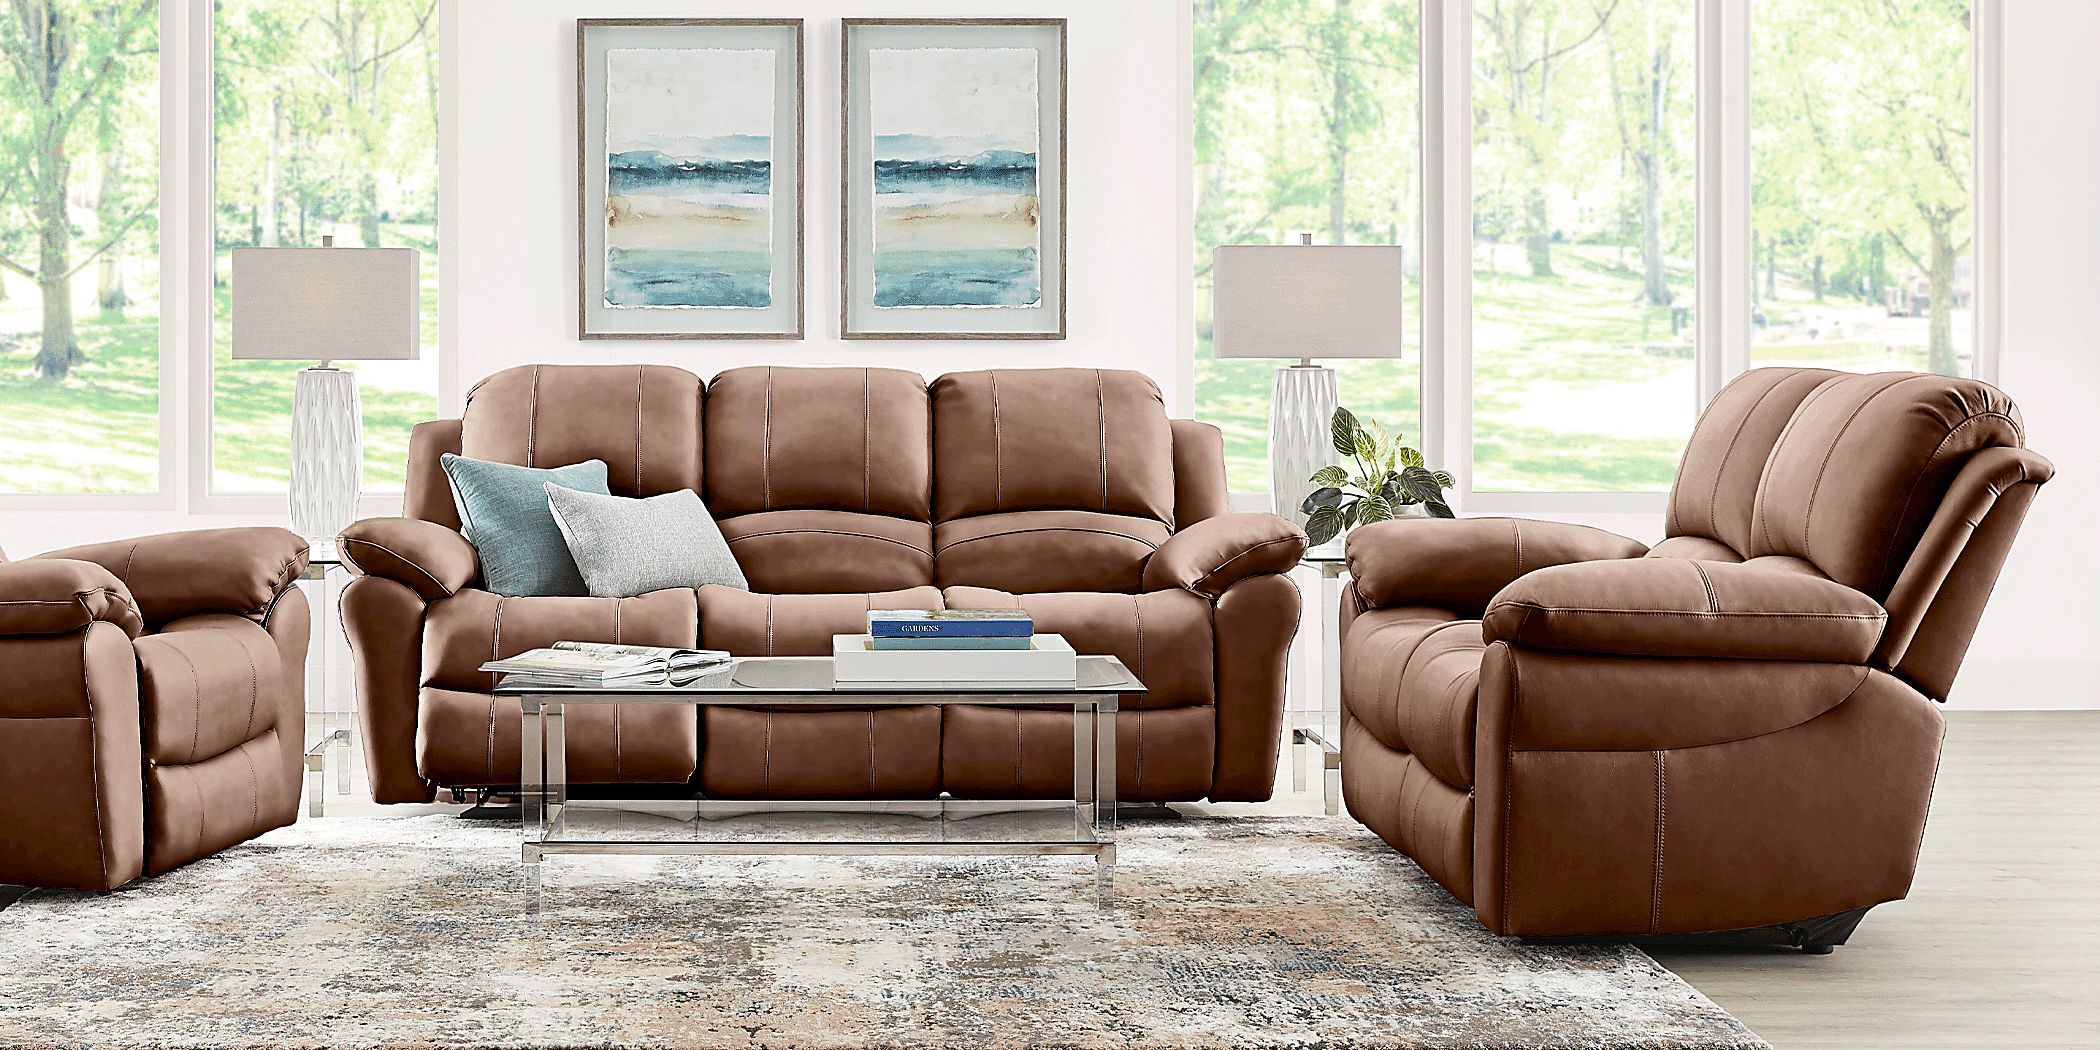 Vercelli Way Brown Leather 5 Pc Living Room with Reclining Sofa